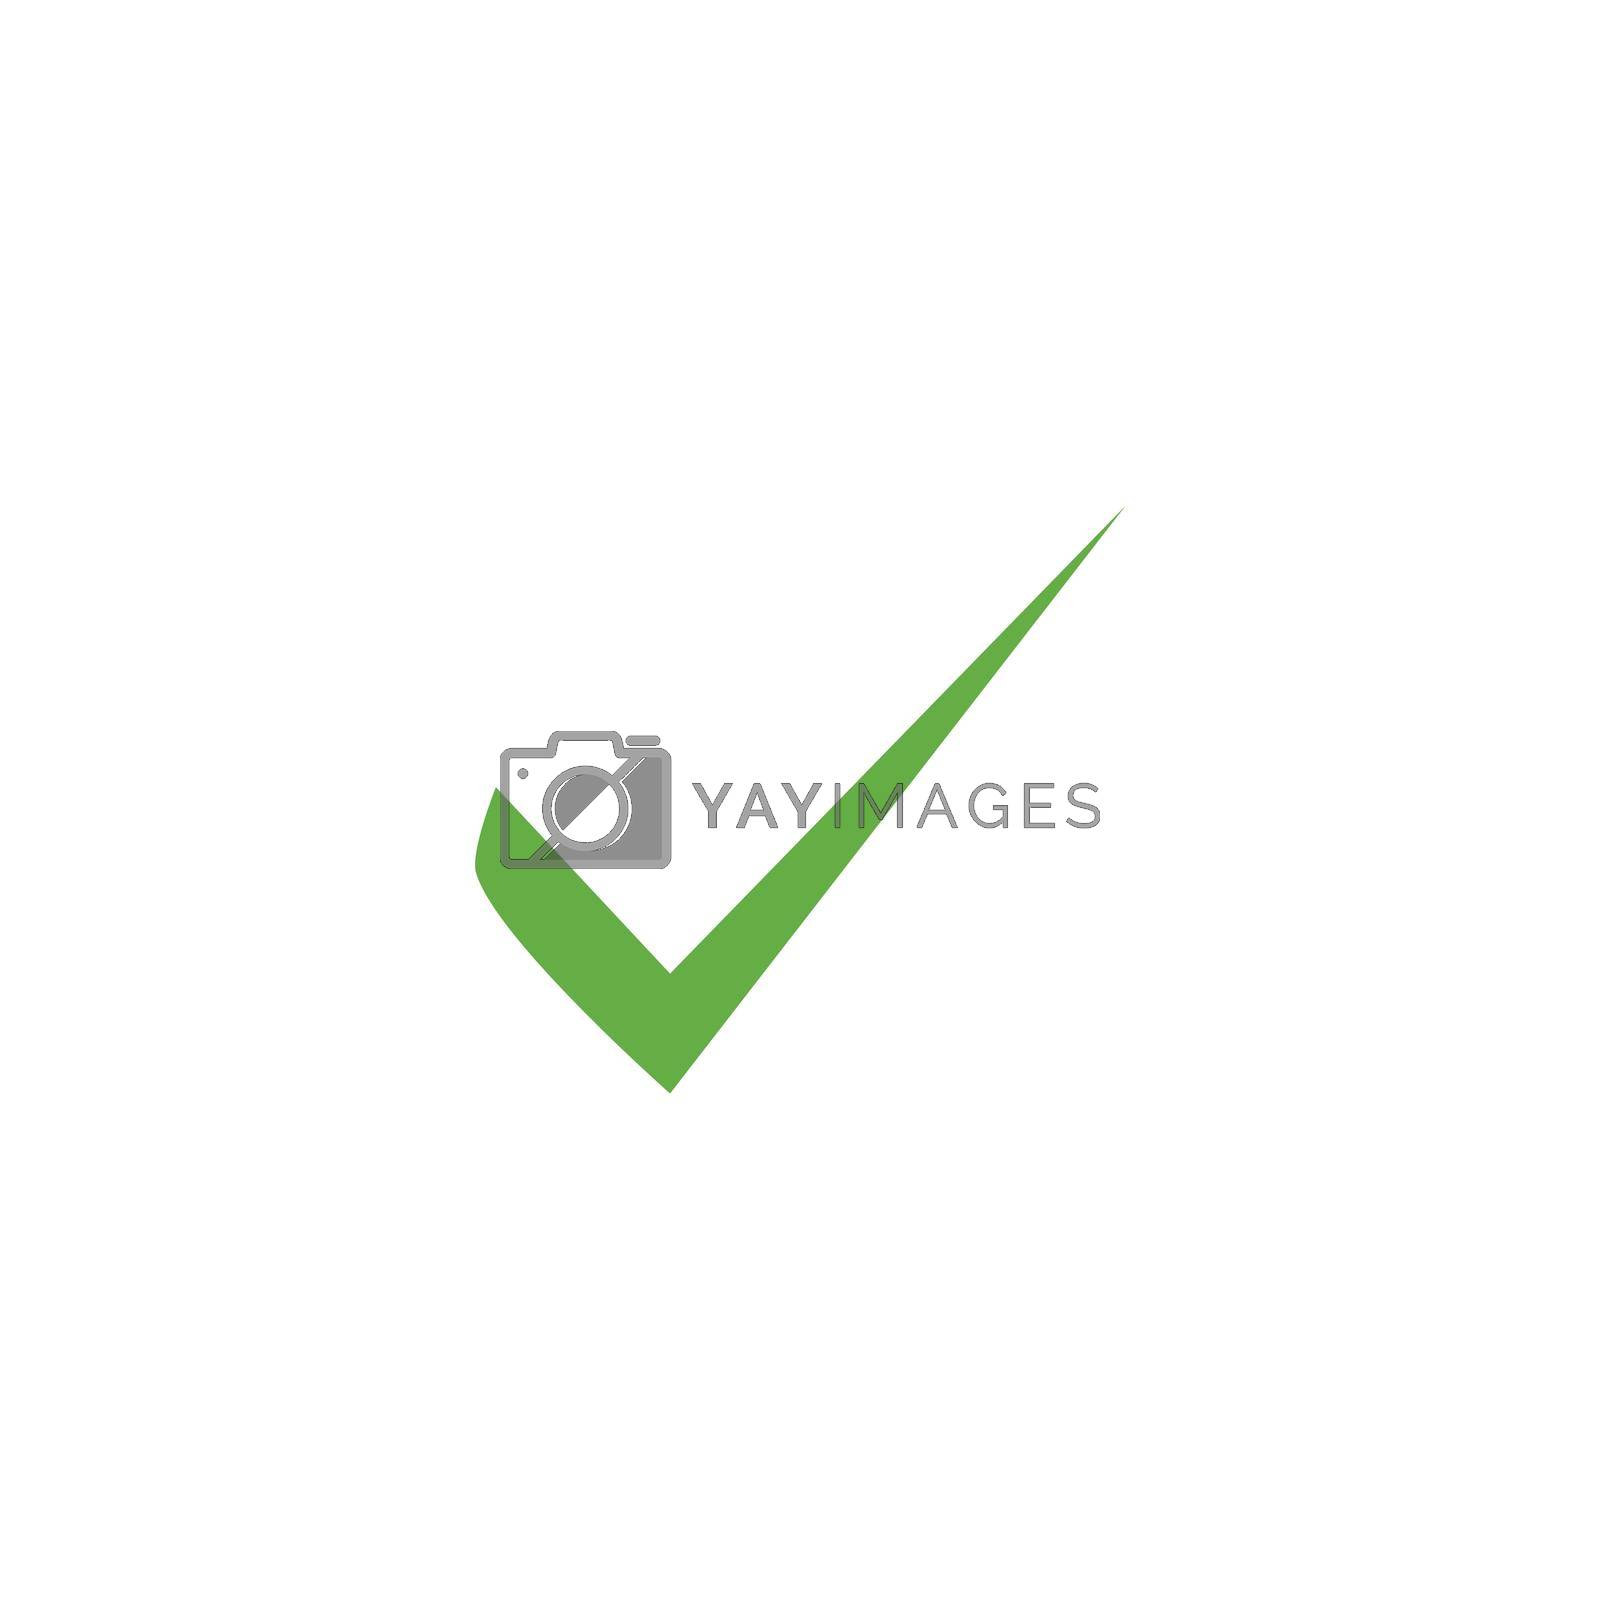 Royalty free image of Check mark illustration by awk